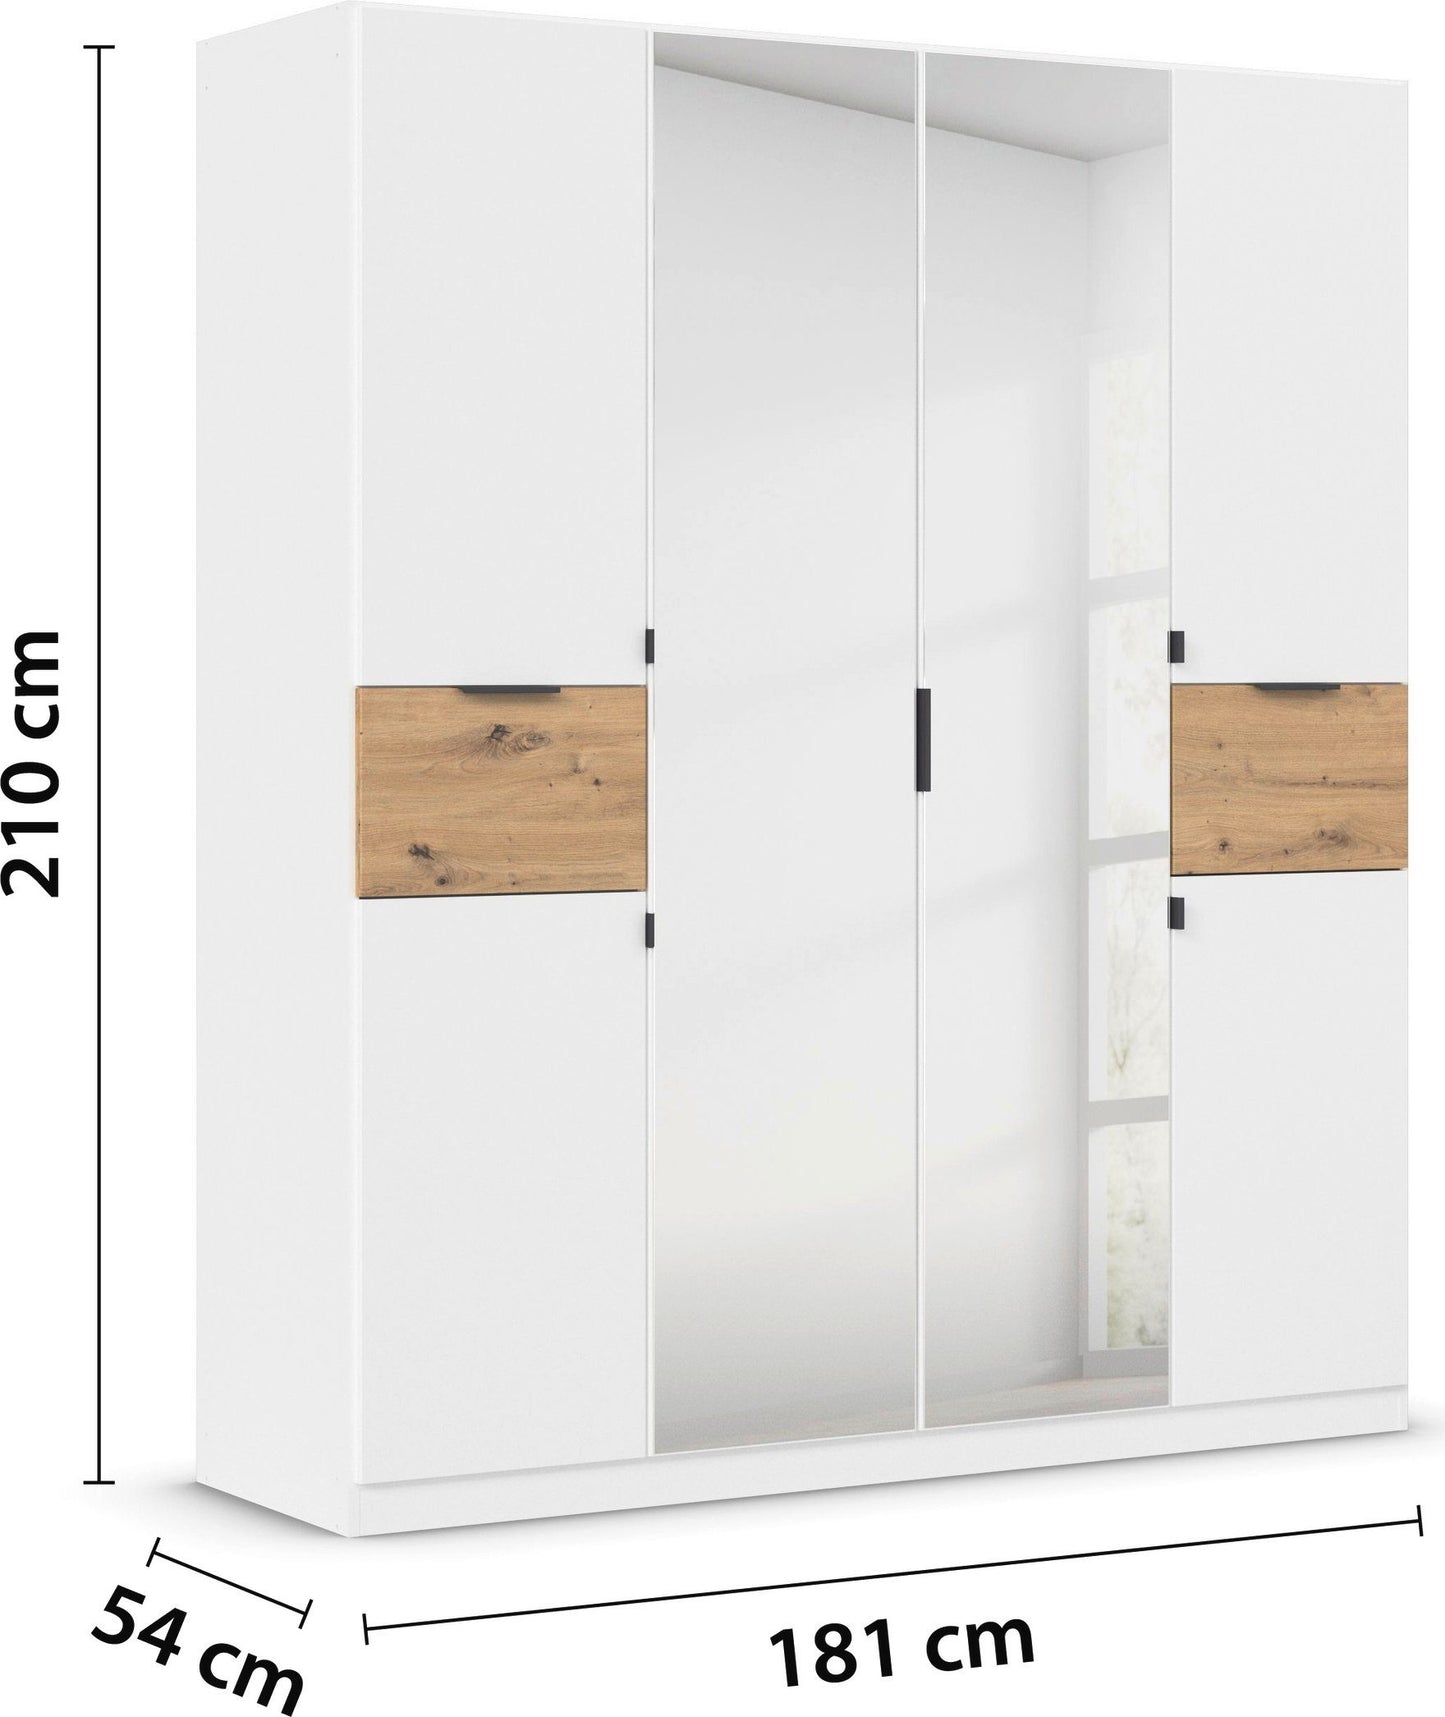 Tico Hinged door Wardrobe by Rauch with Mirrors